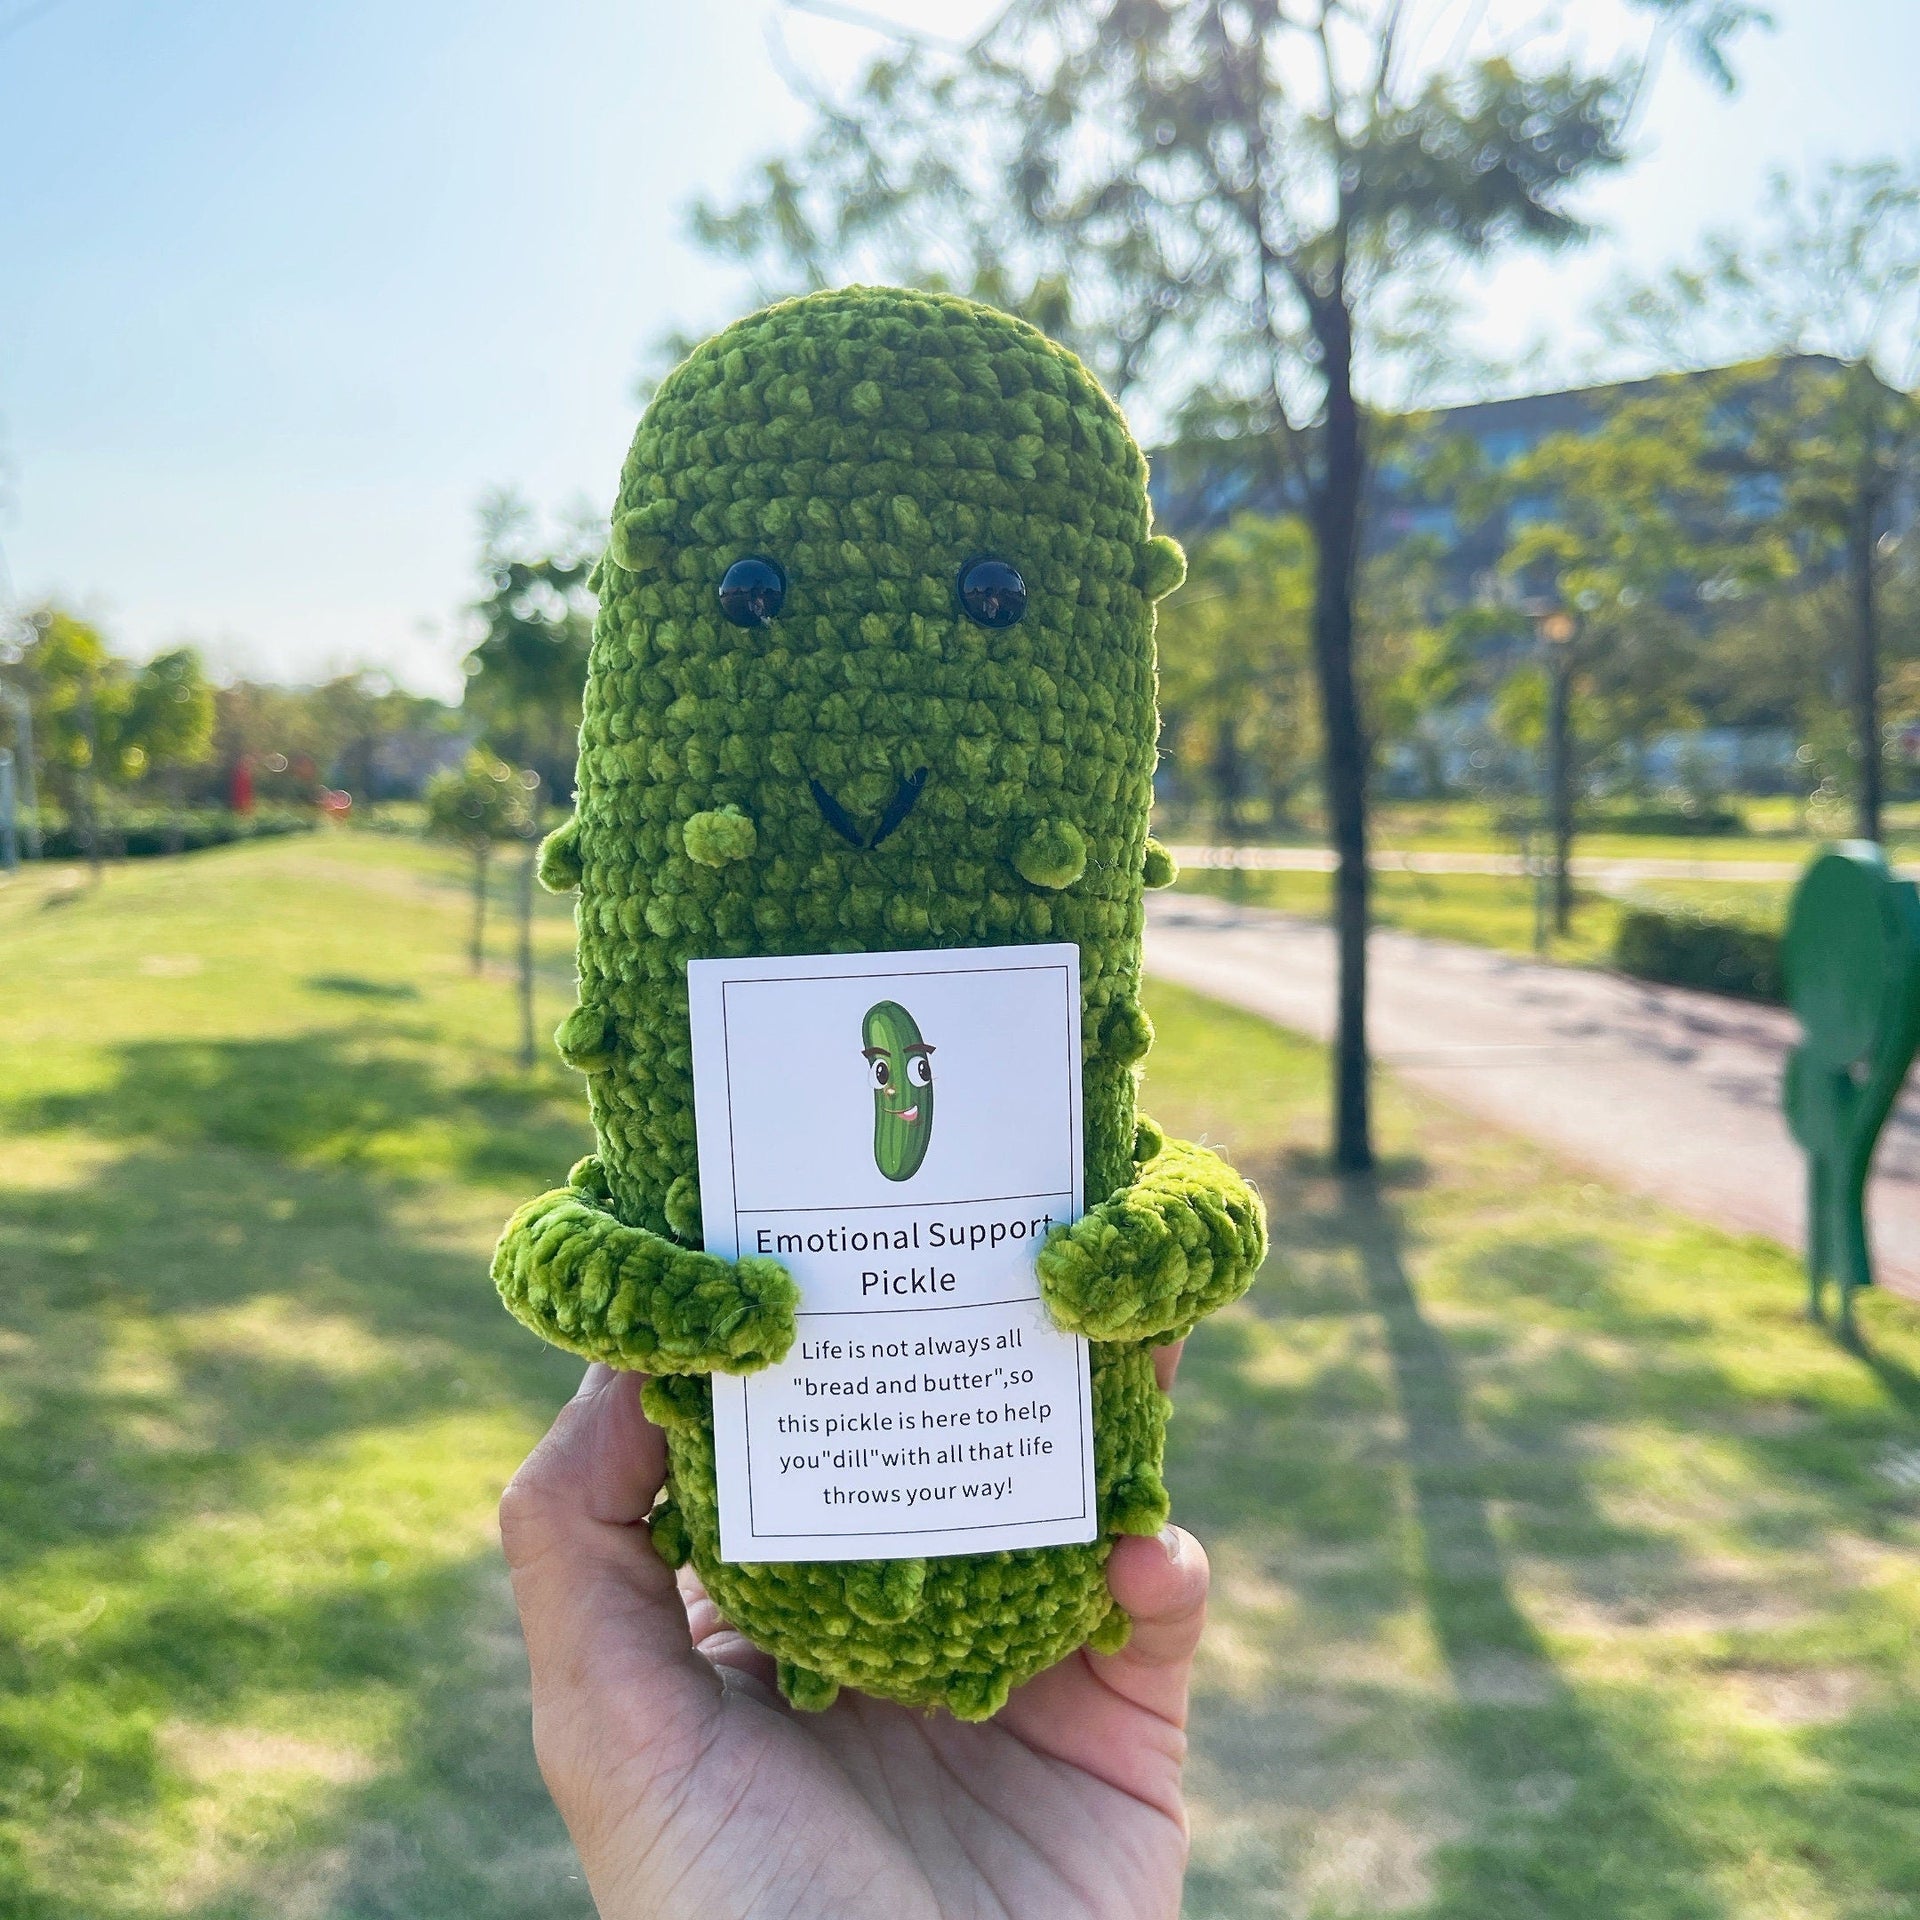 Crochet Pickle Plushie, Emotional Support Pickle, Pickle Stuffed